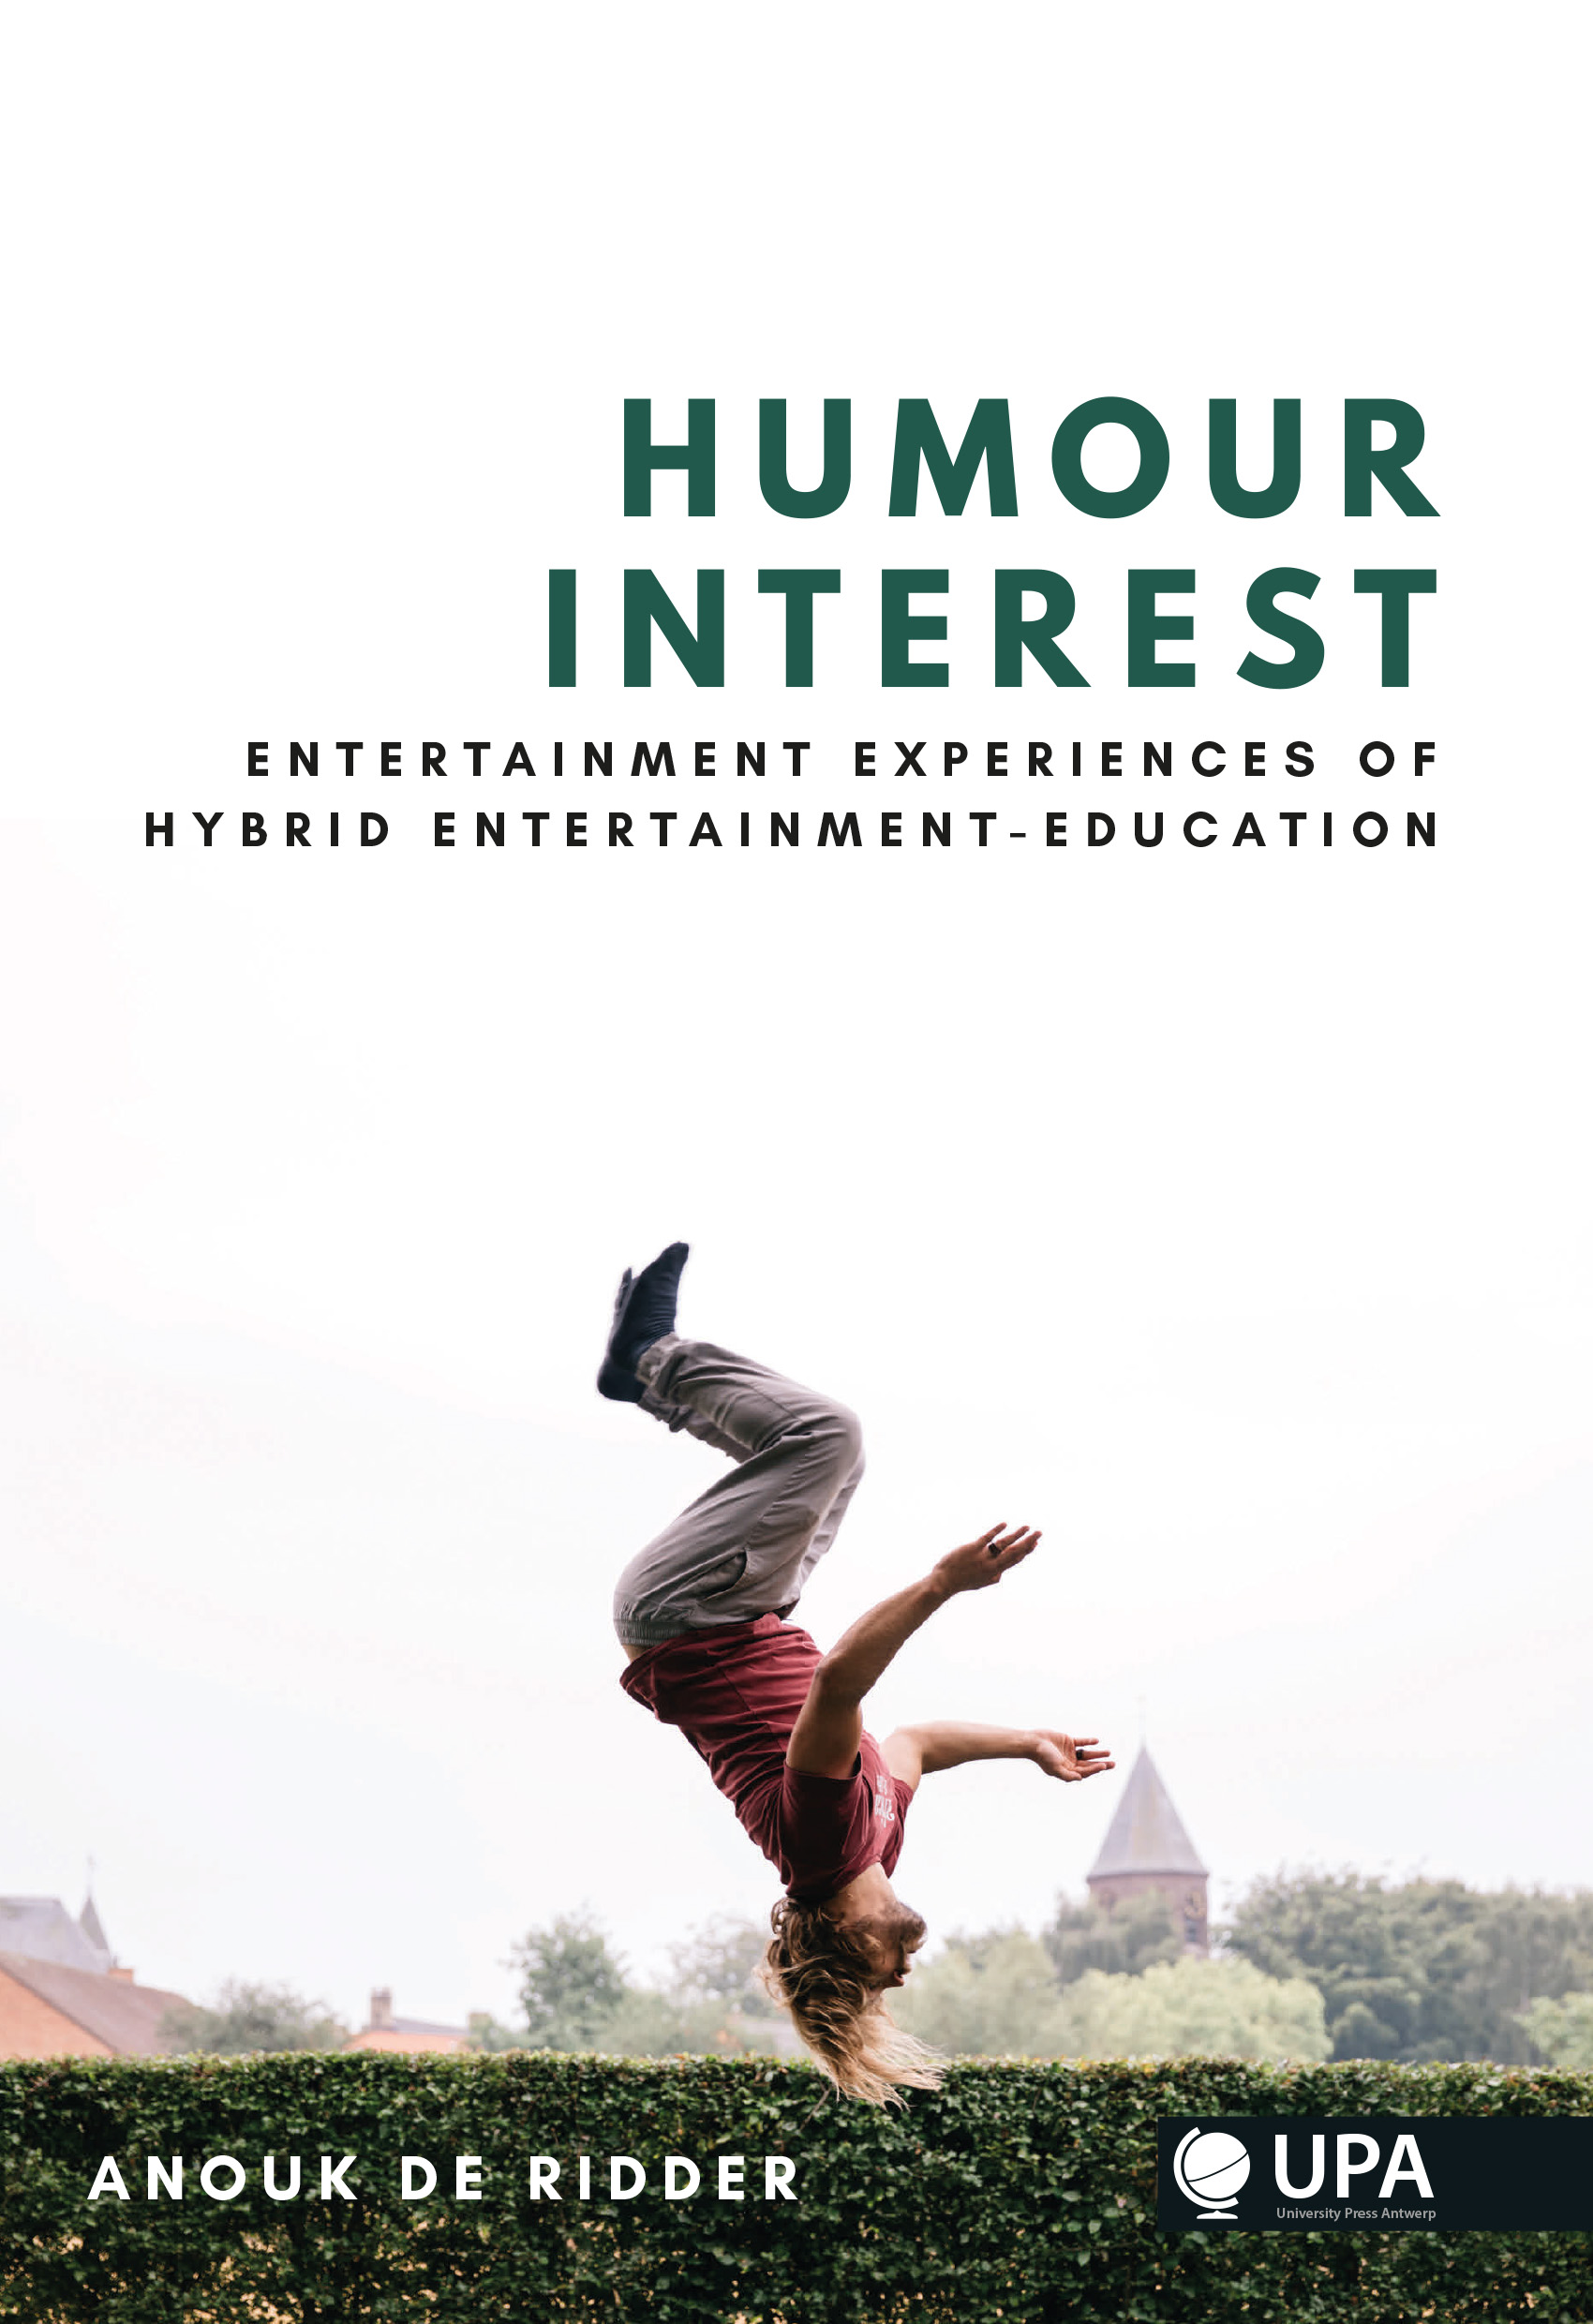 A CASE STUDY OF HUMOUR INTEREST: ENTERTAINMENT EXPERIENCES OF ENTERTAINMENT-EDUCATION TELEVISION PROGRAMMES